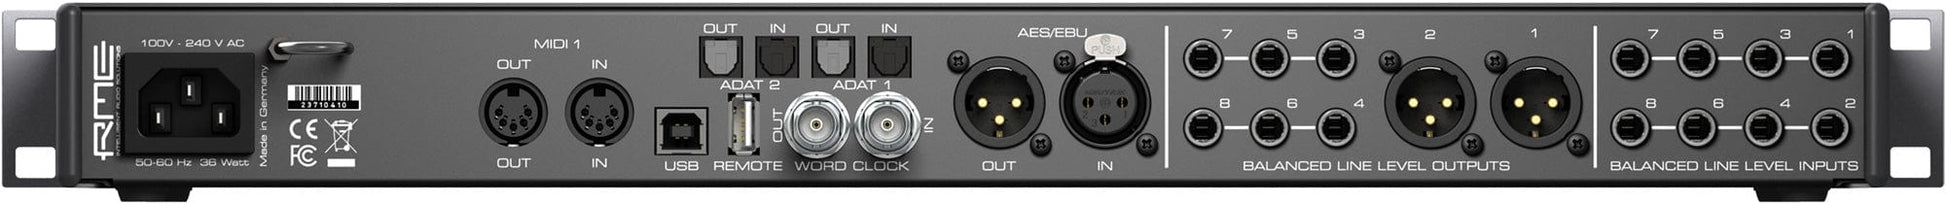 RME Fireface UFX II 60-Channel Hi-Performance USB 2.0 Audio Interface - PSSL ProSound and Stage Lighting